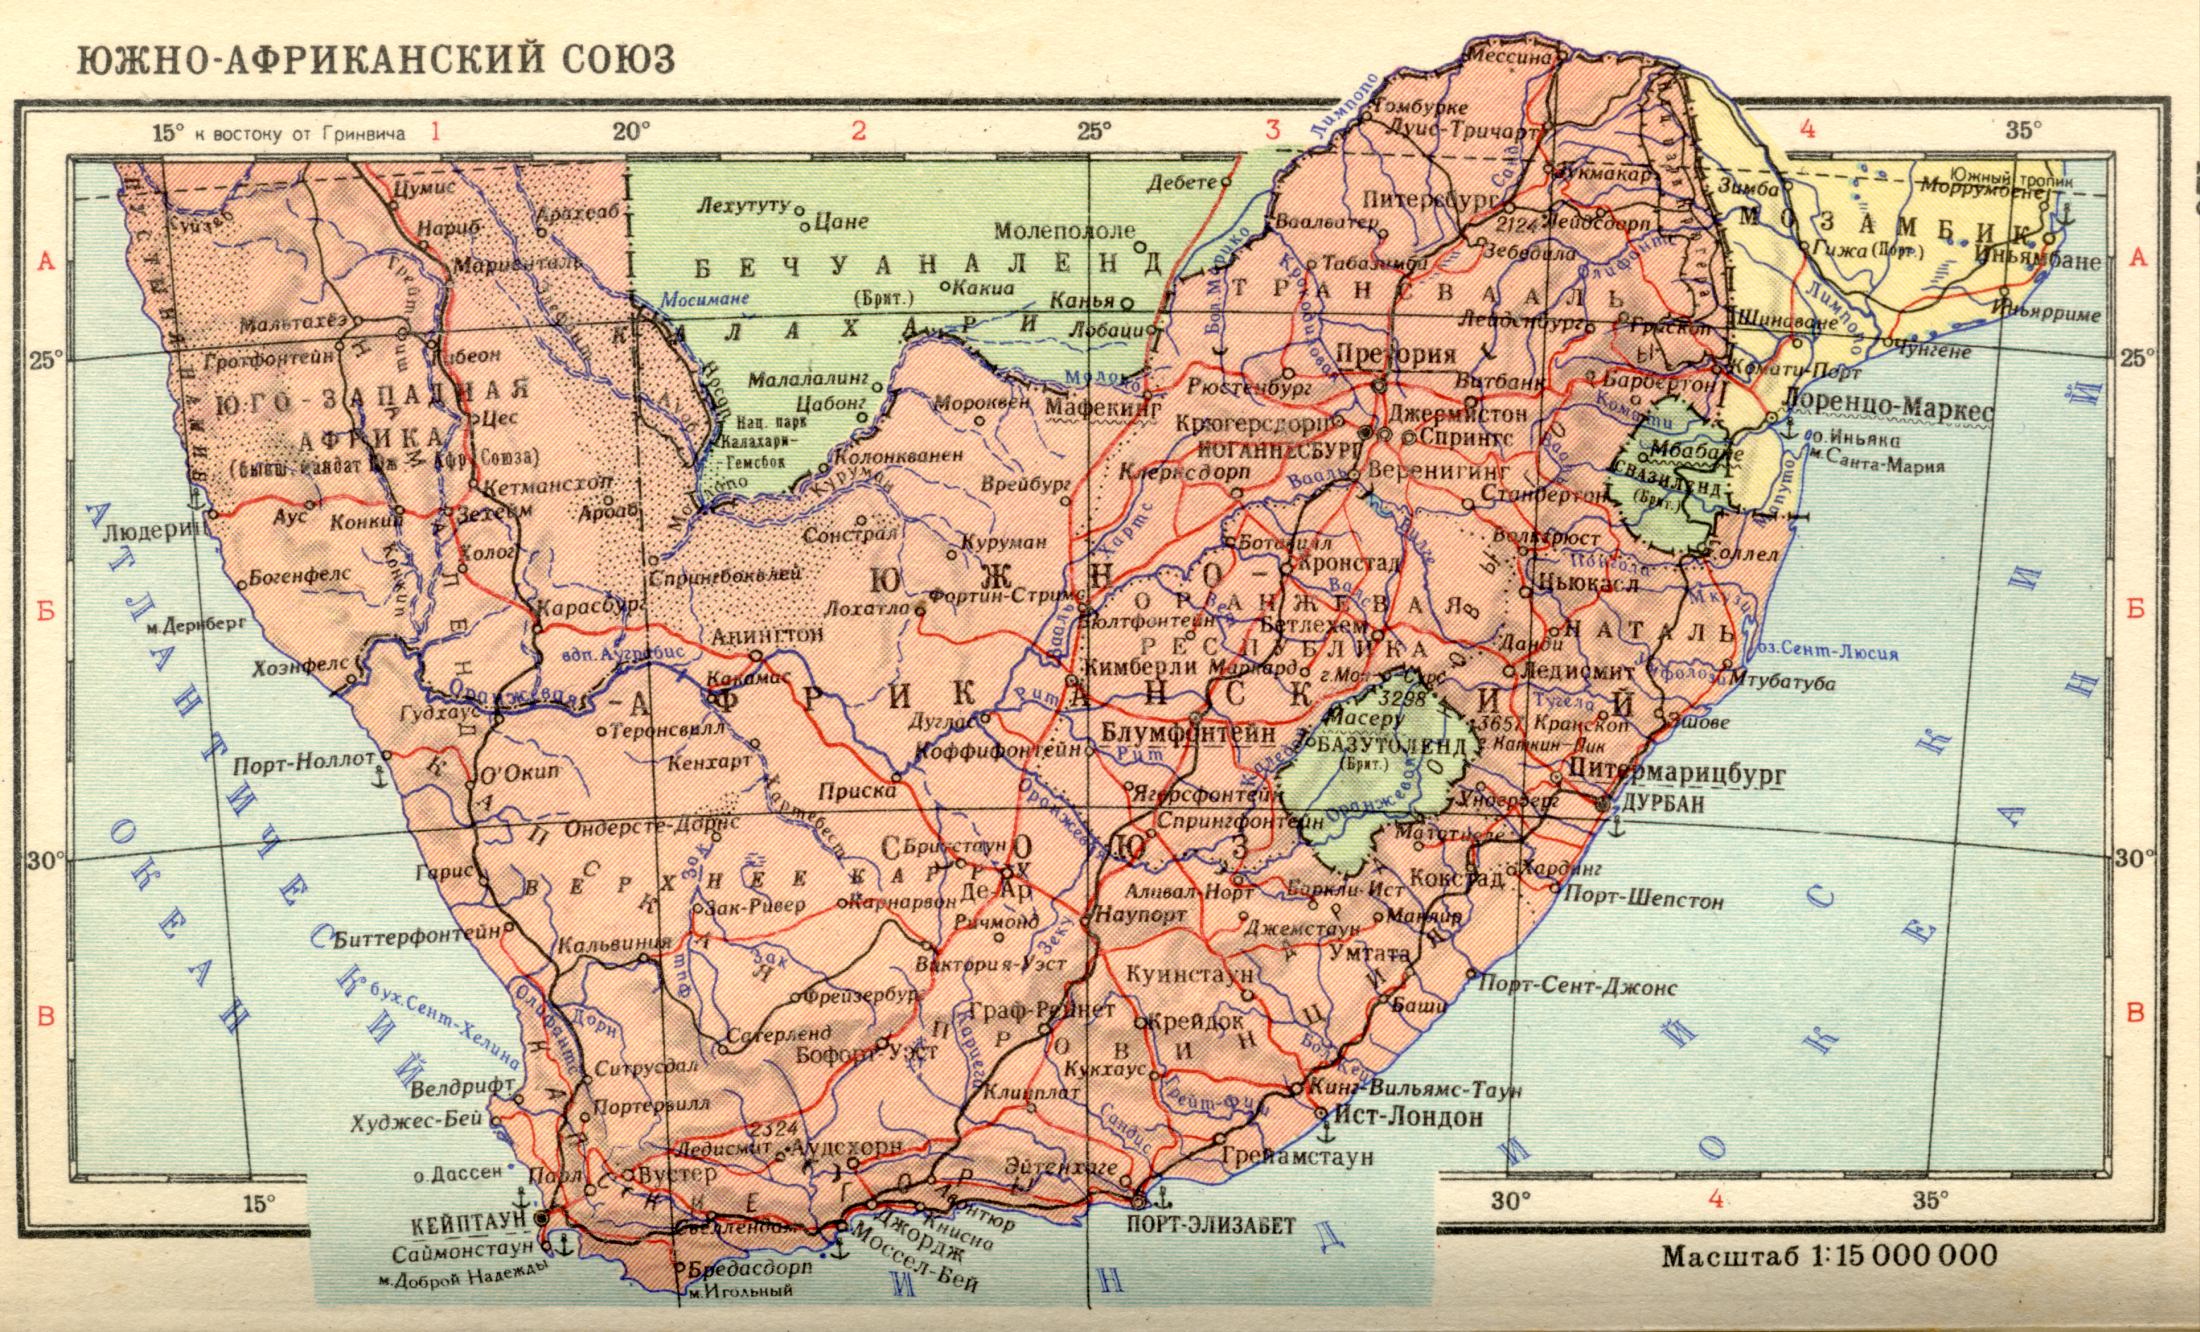 1956 year. A political map of the World. The South African Union in 1956. Download a detailed map